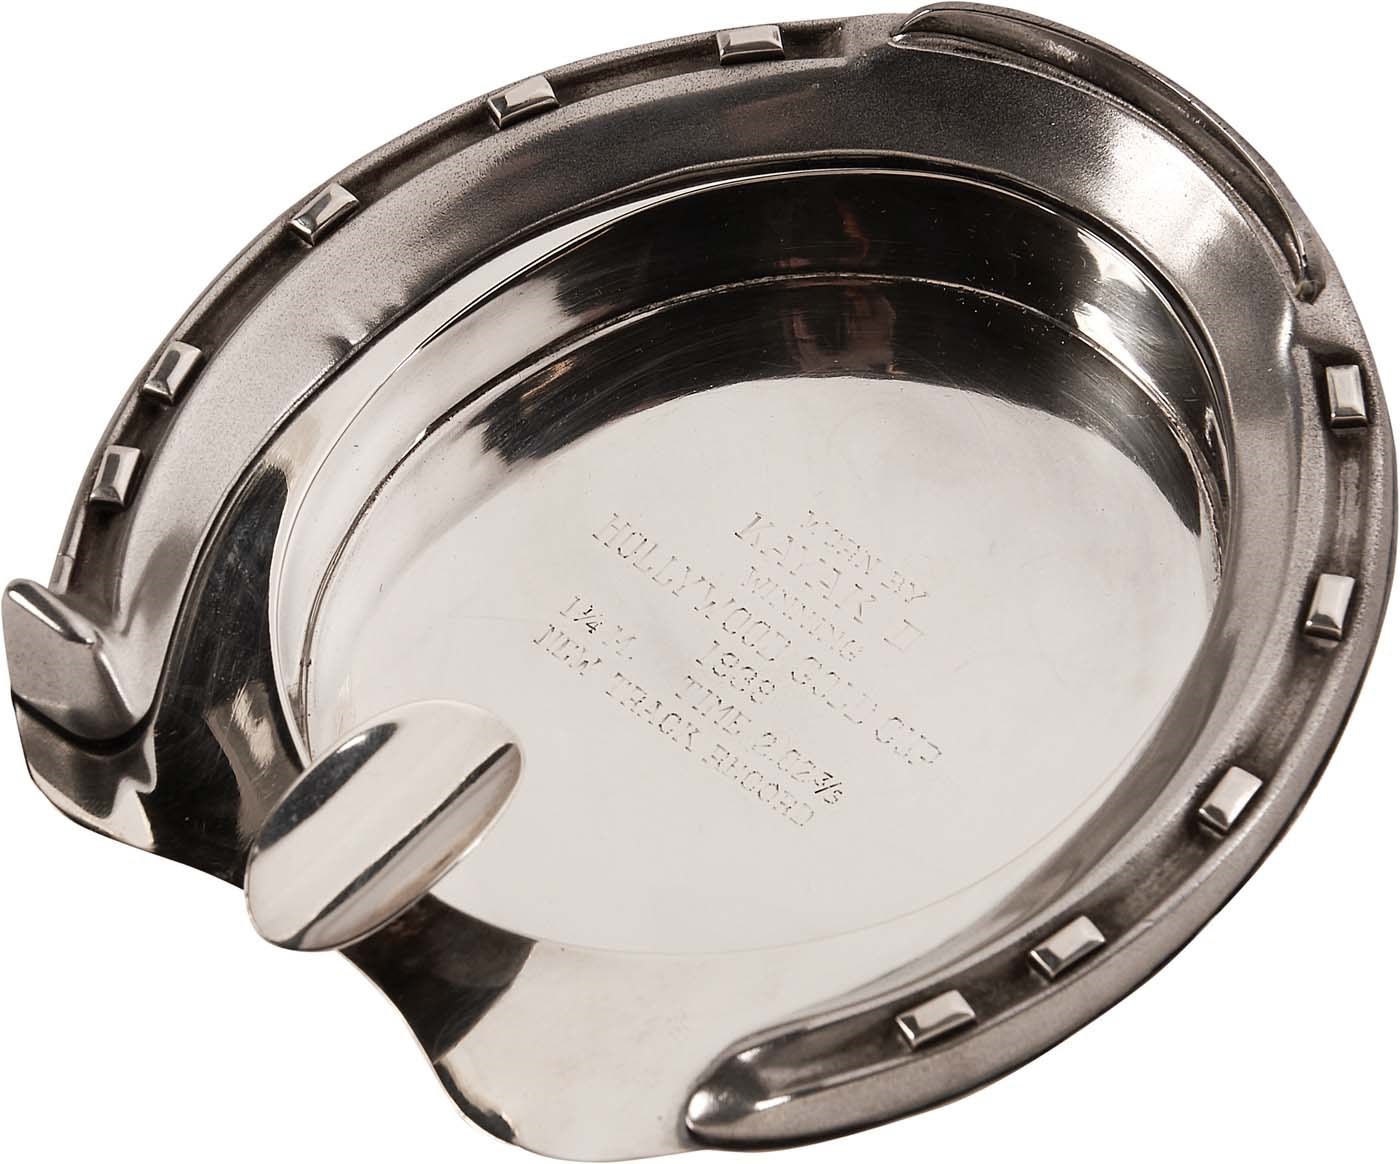 Horse Racing - 1939 Kayak II Hollywood Gold Cup Race Worn Horse Shoe Sterling Silver Ash Tray - New Track Record